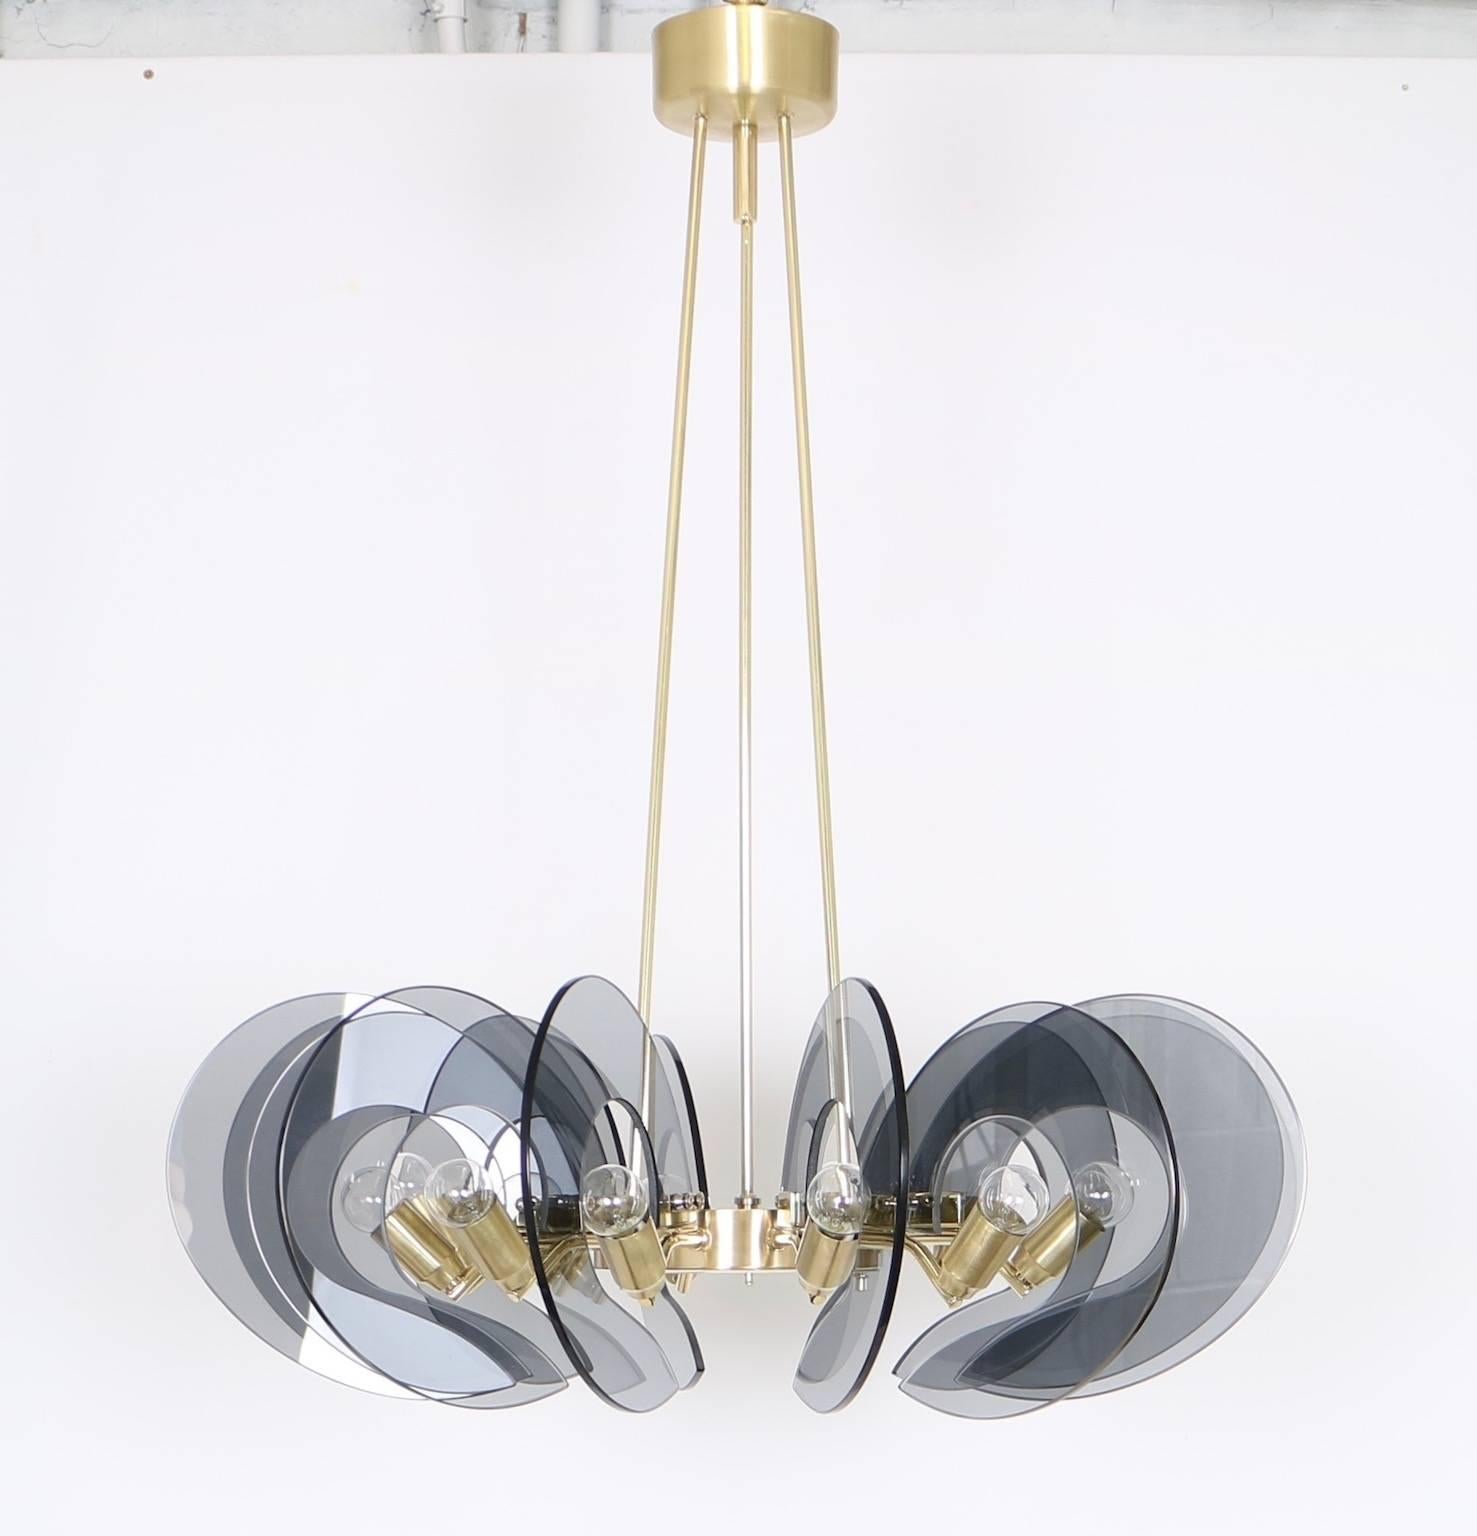 12-light chandelier, attributed to Fontana Arte, manufactured in Italy circa 1950s, brass ring frame with brushed and polished finishes, holding in suspension blue-tinted glass semi-circle panels. Completely restored and adapted to US standard,